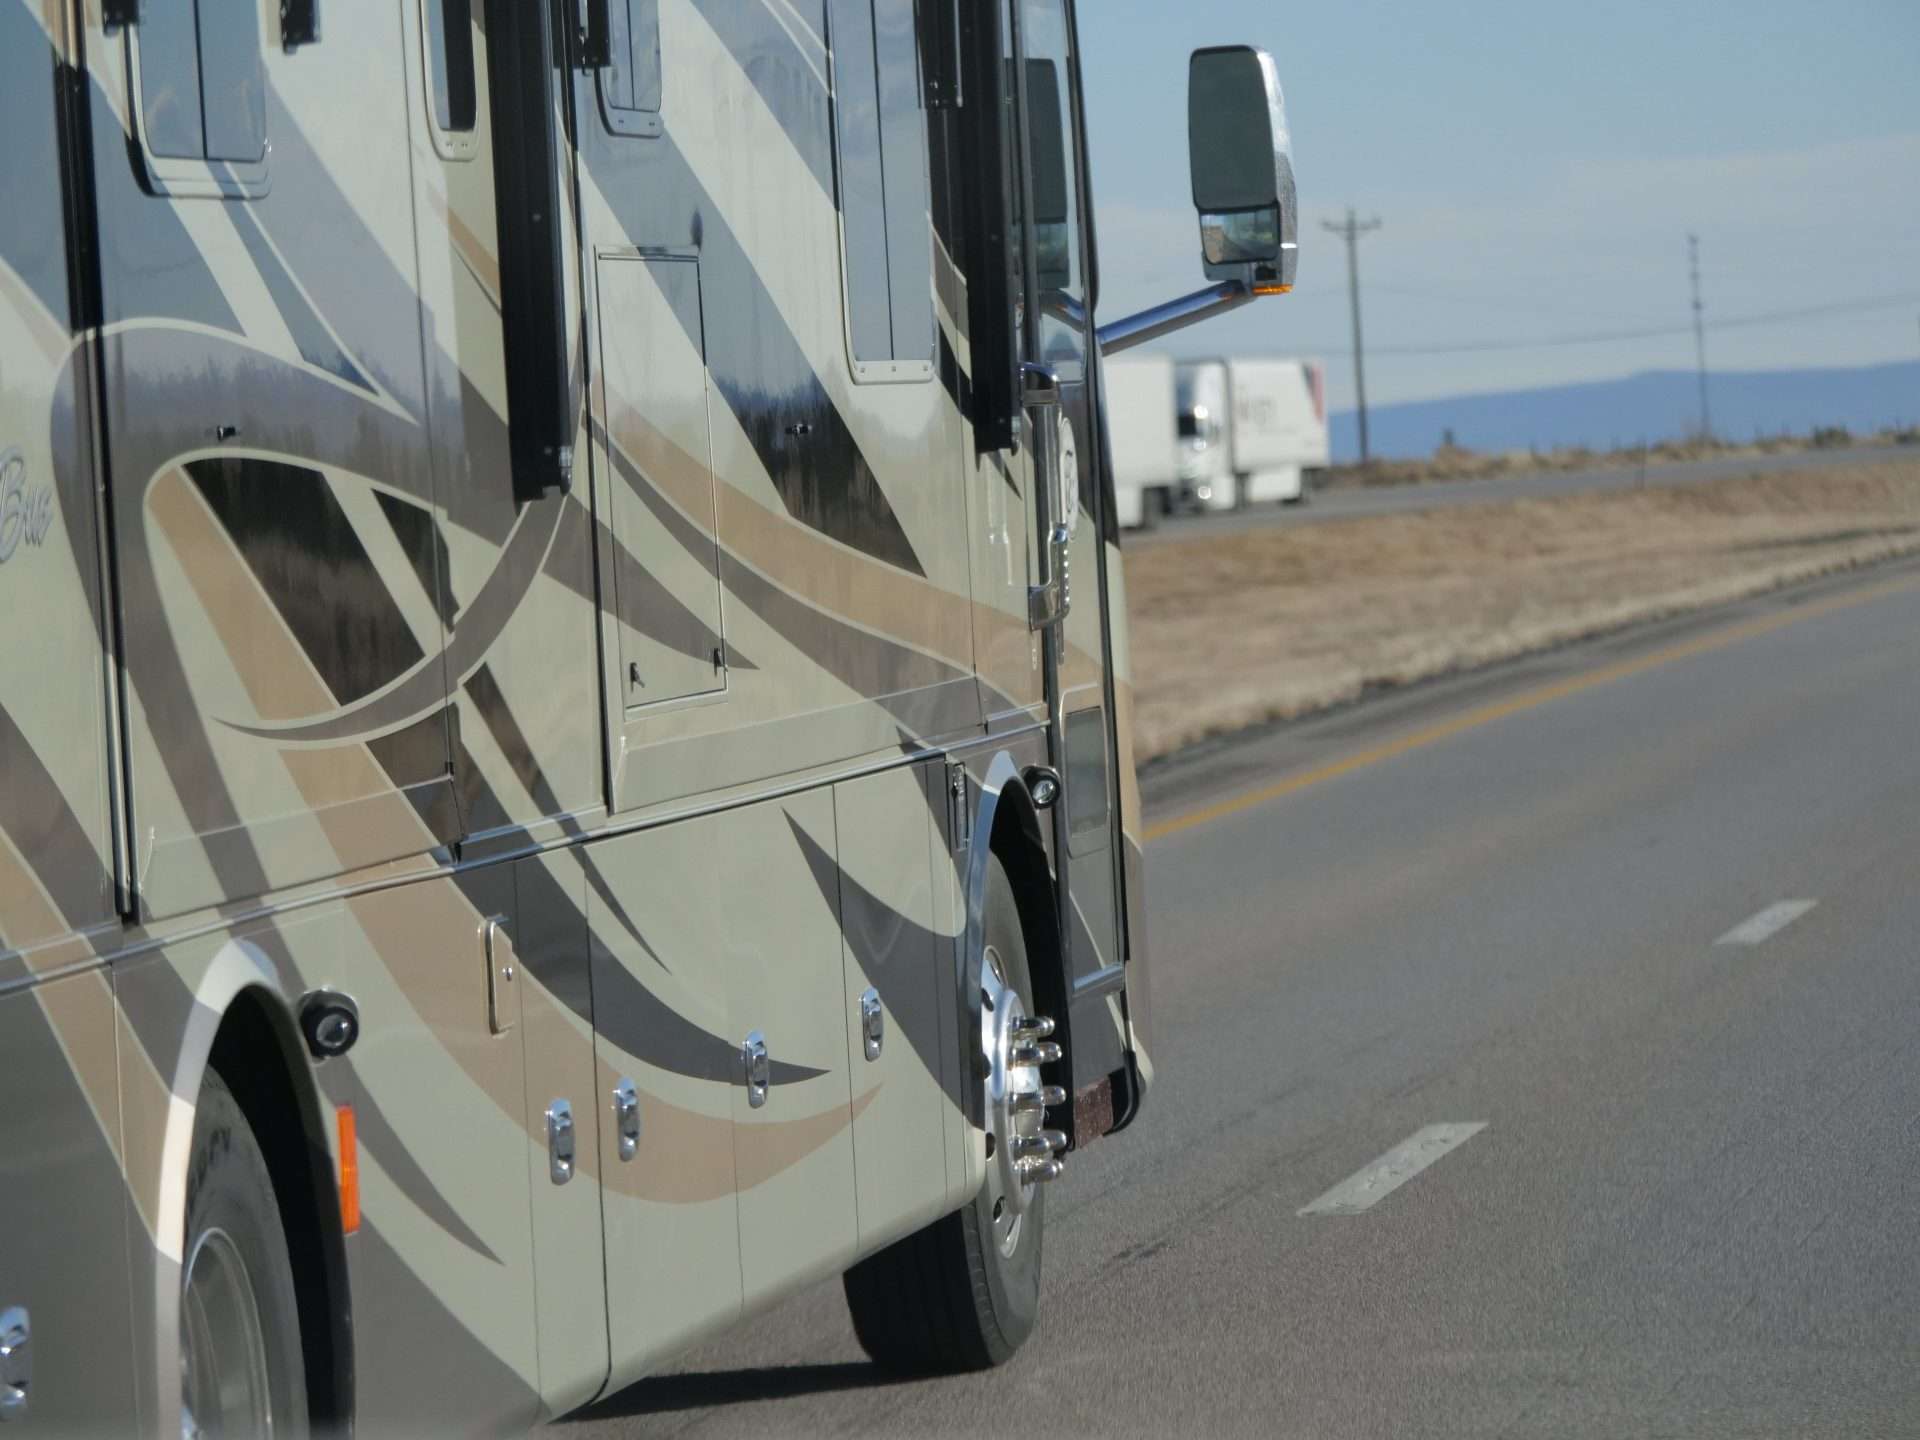 Class A motorhome on the road